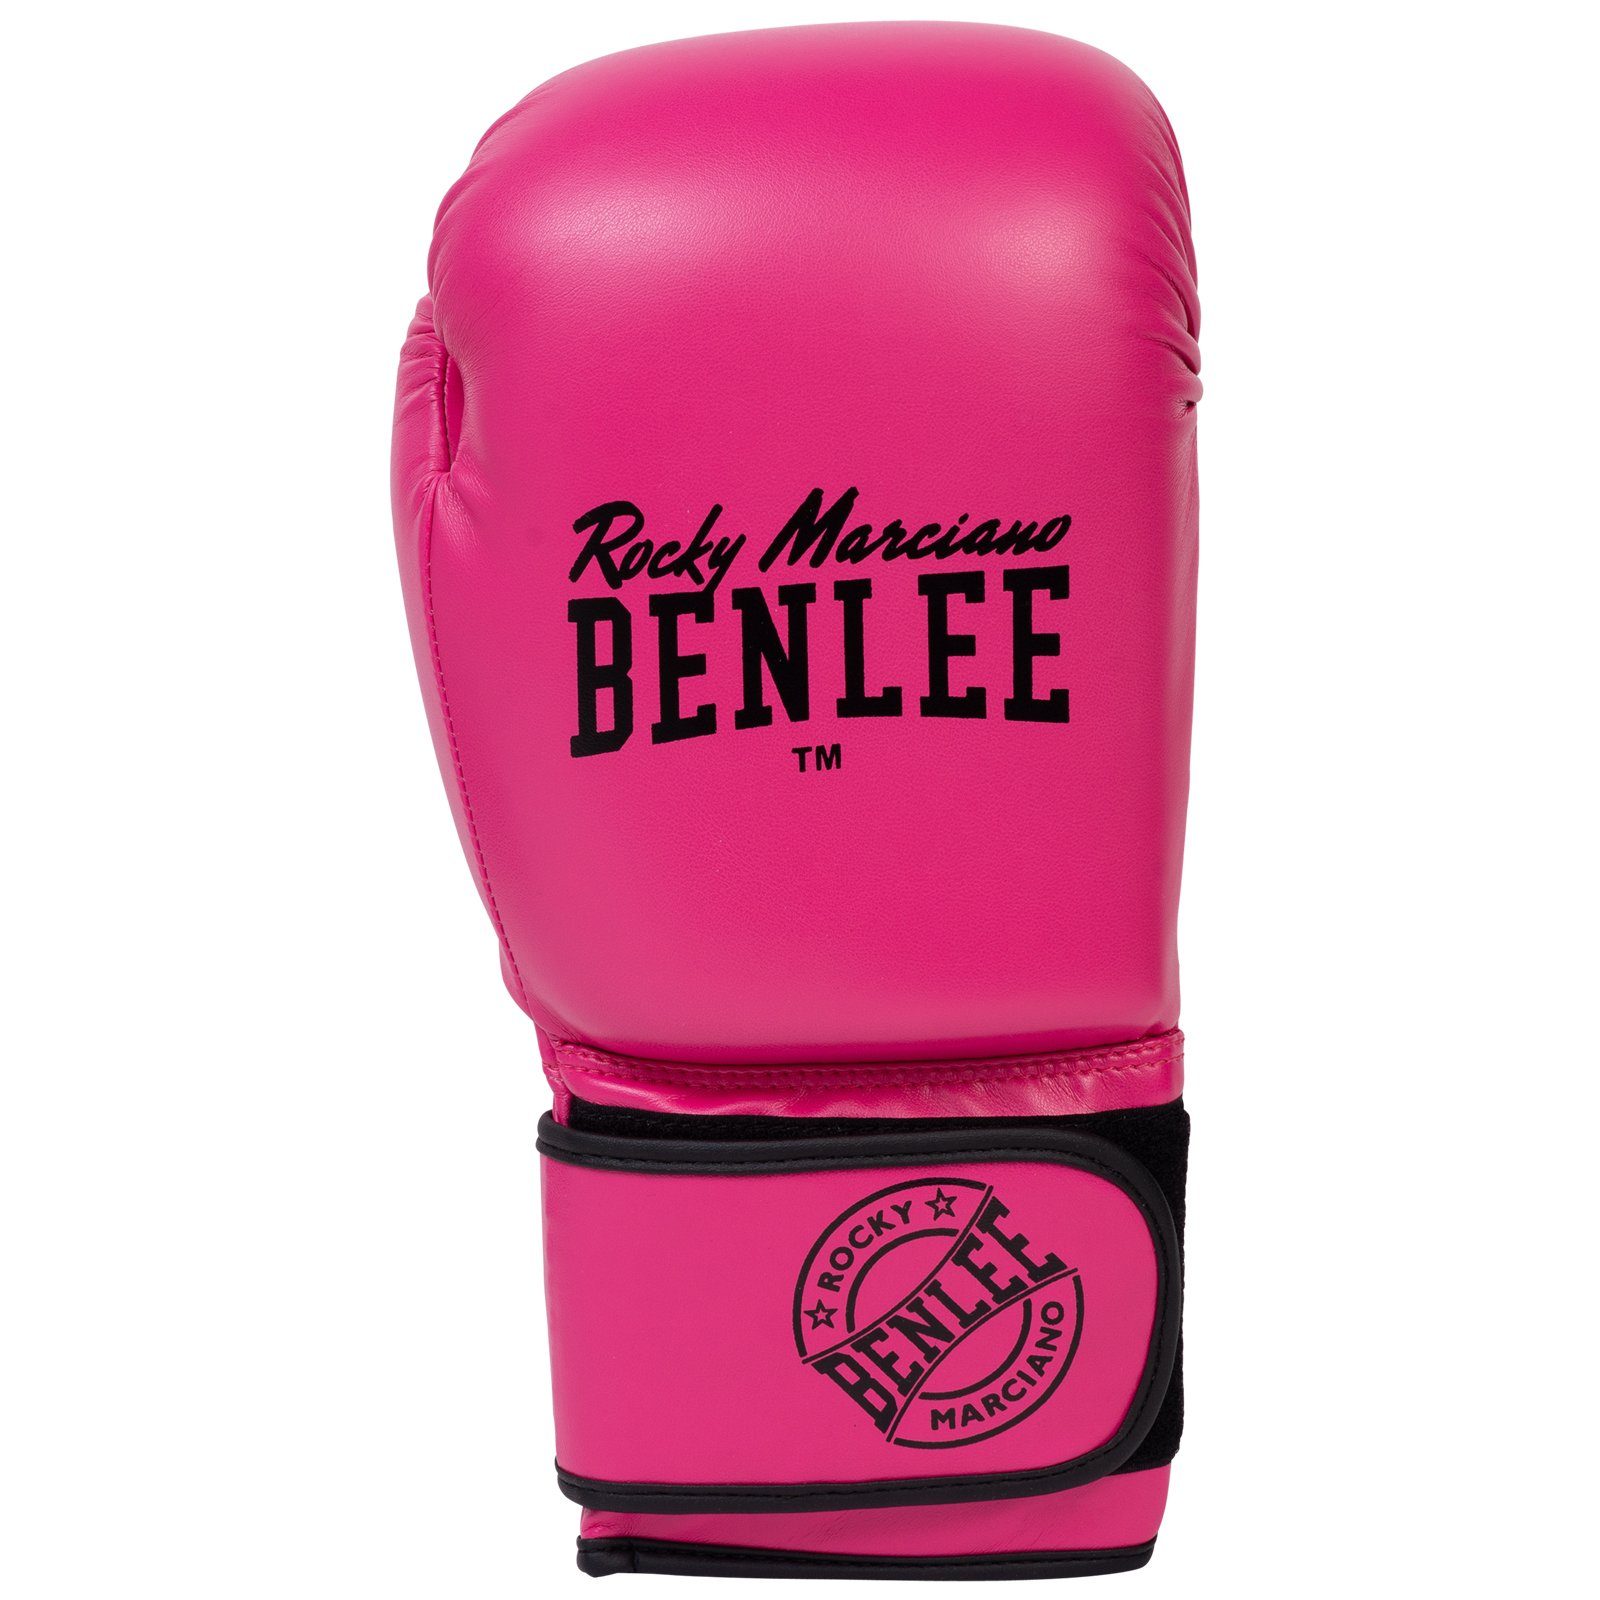 Benlee CARLOS Boxhandschuhe Rocky Marciano Pink